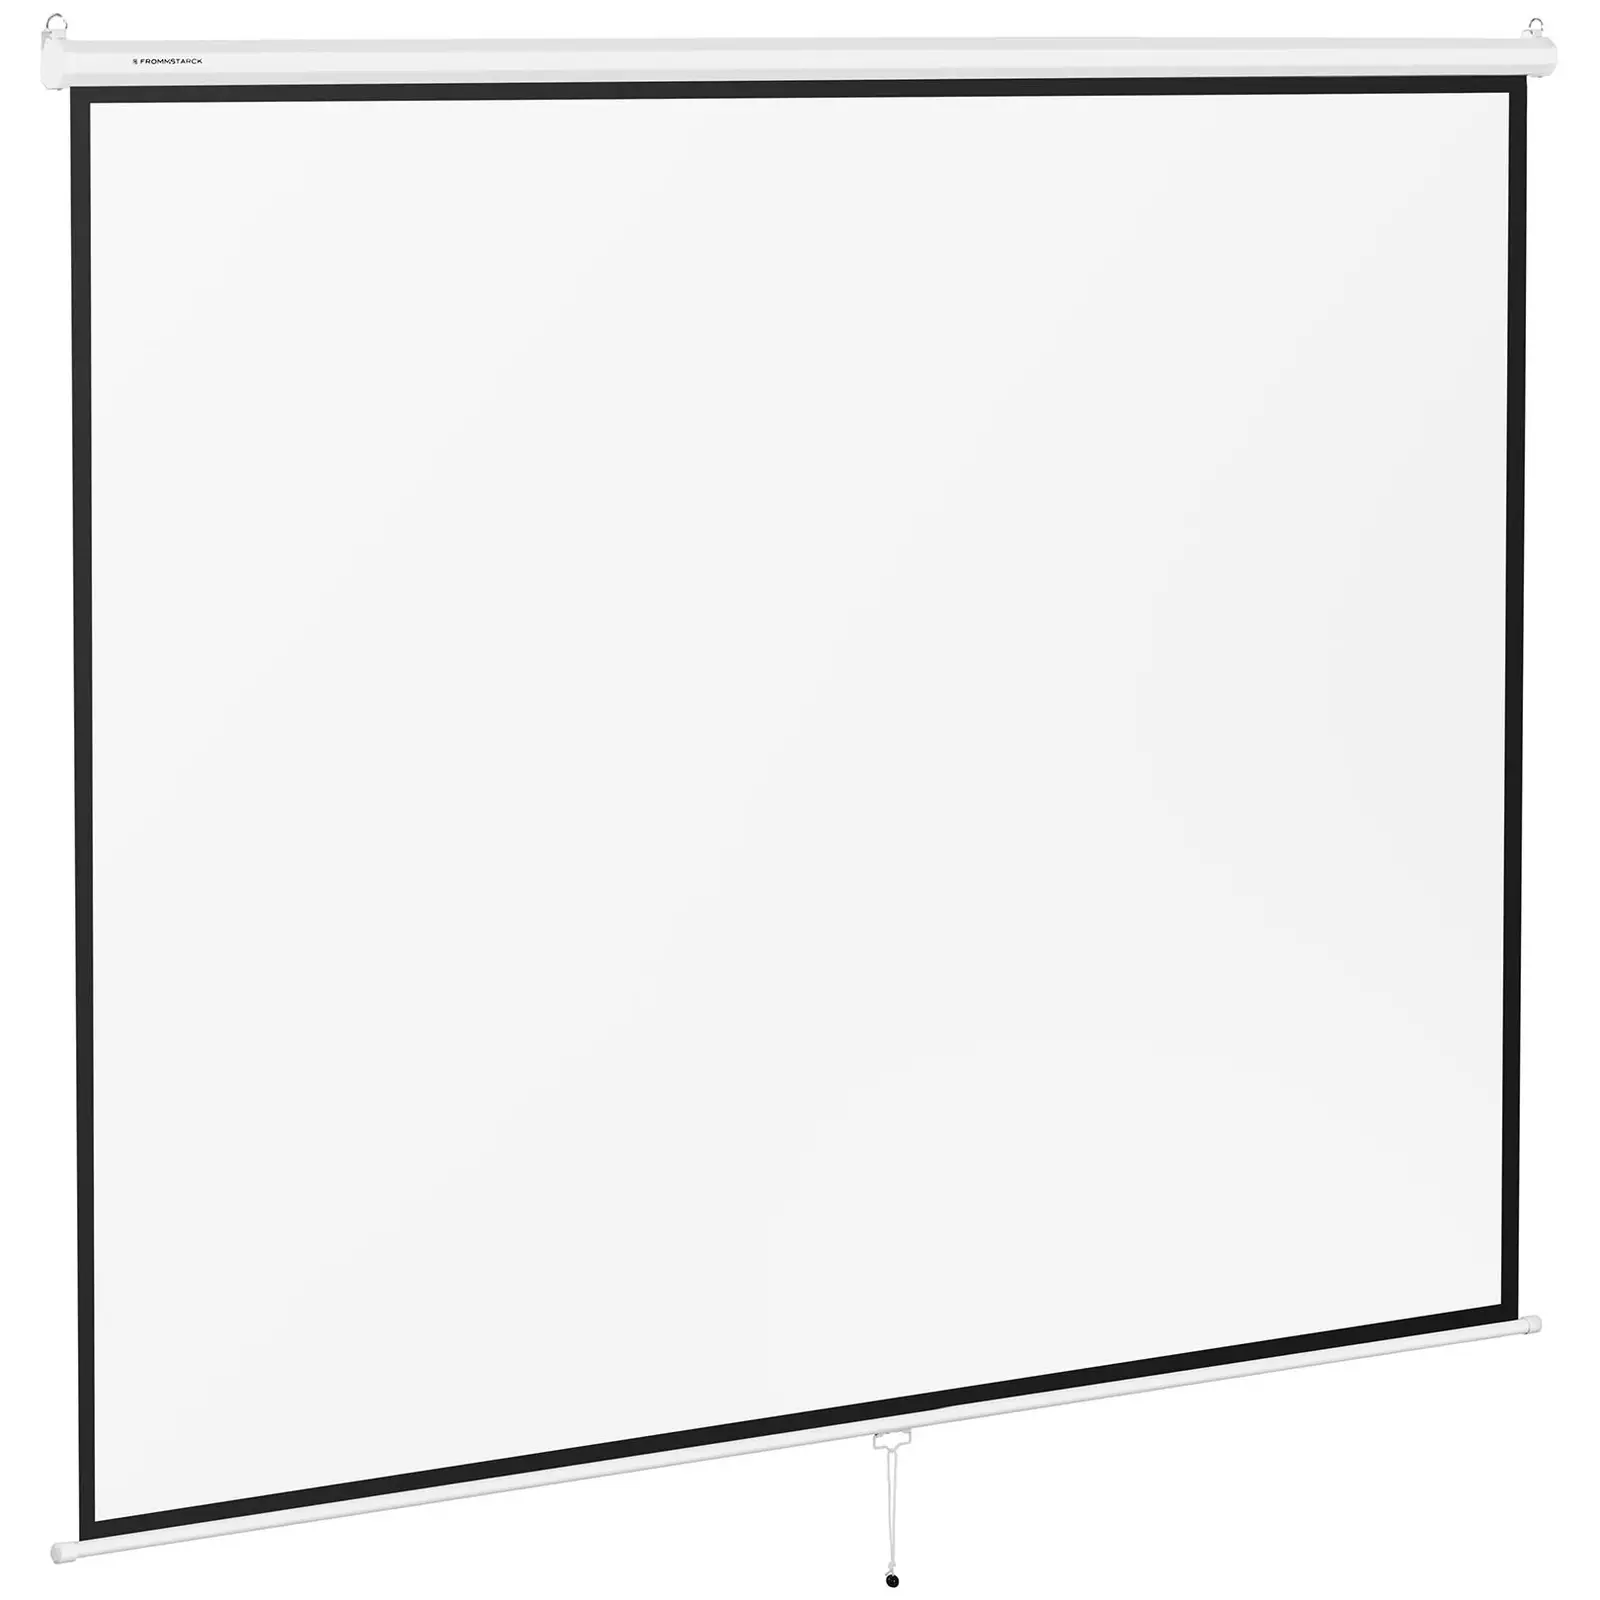 Projection Screen - 312.8 x 239 cm - 4:3